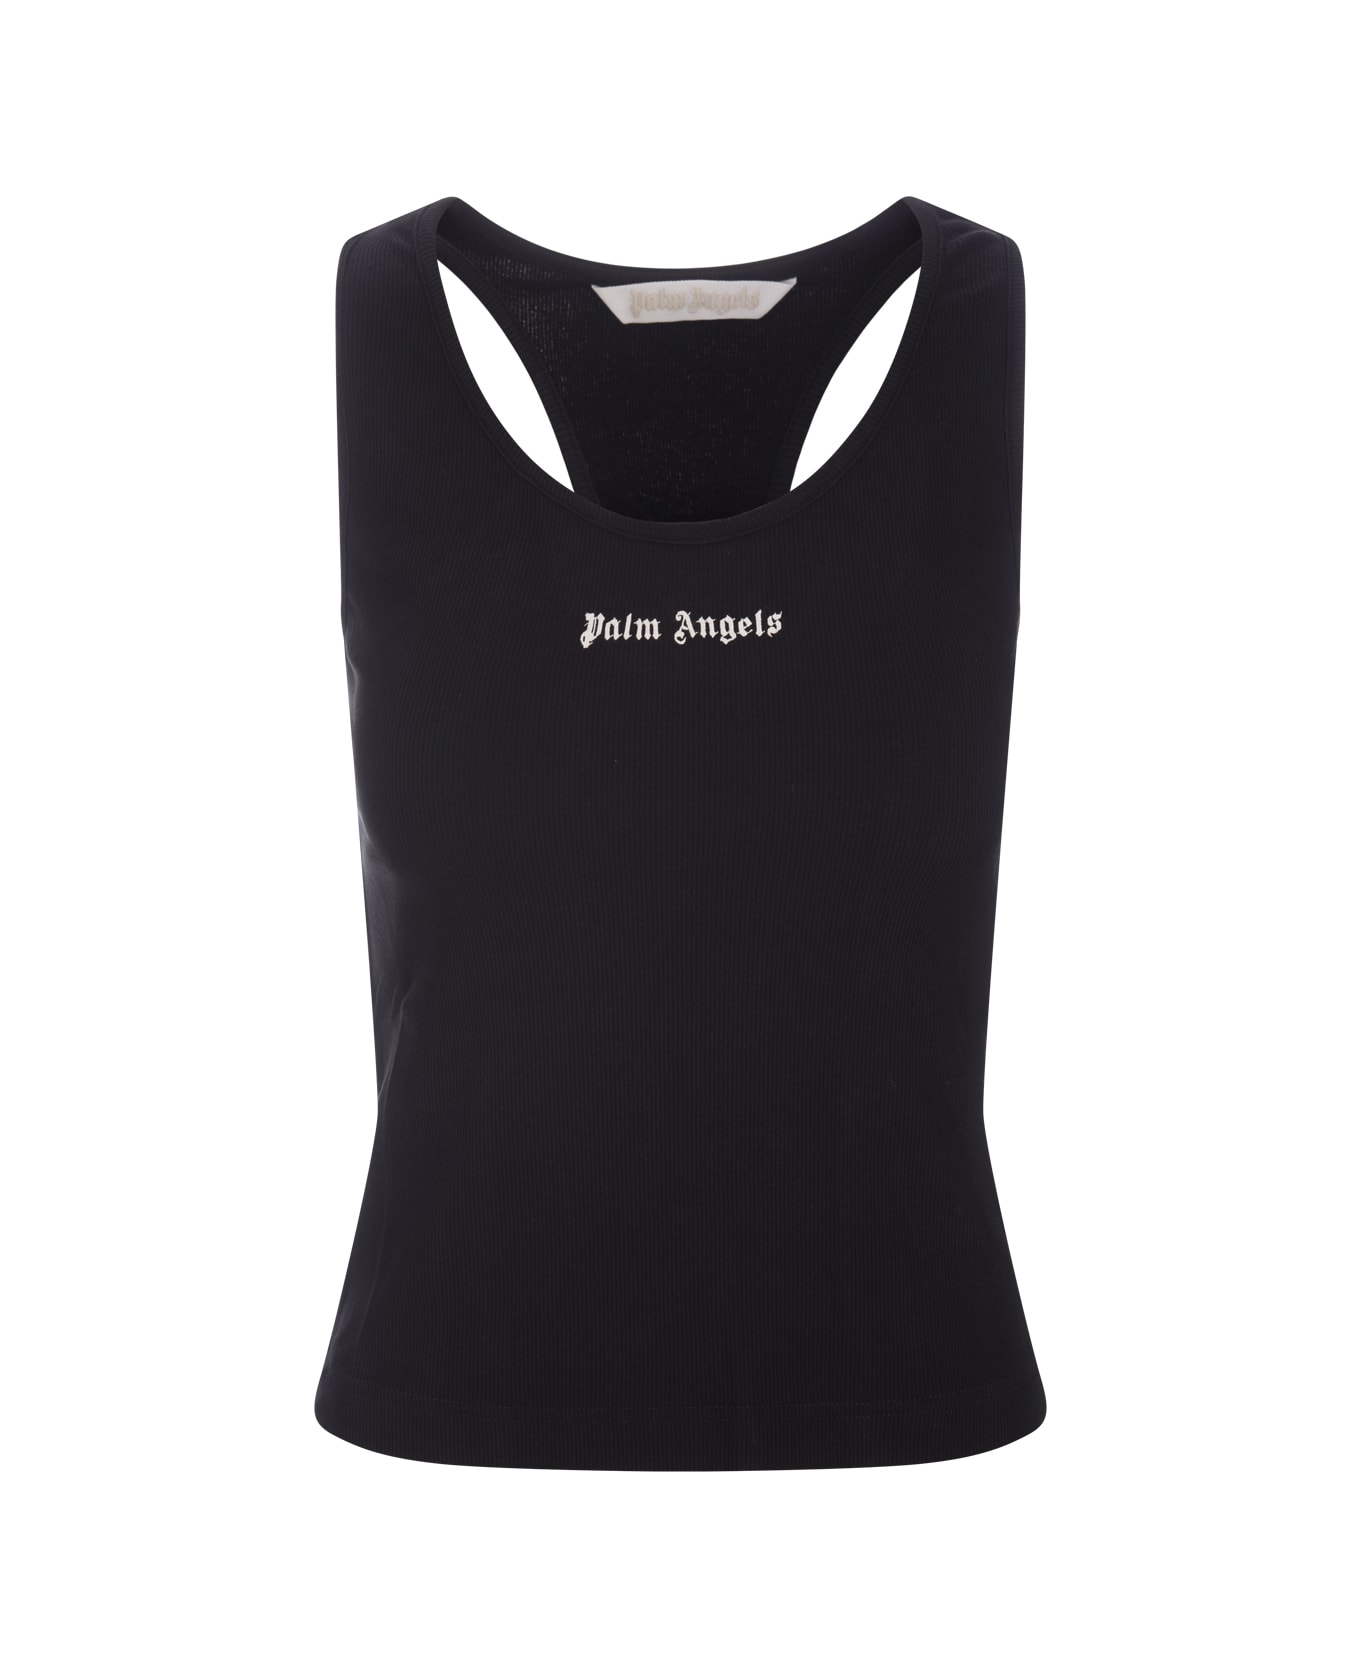 Palm Angels Black Embroidered Tank Top - Black